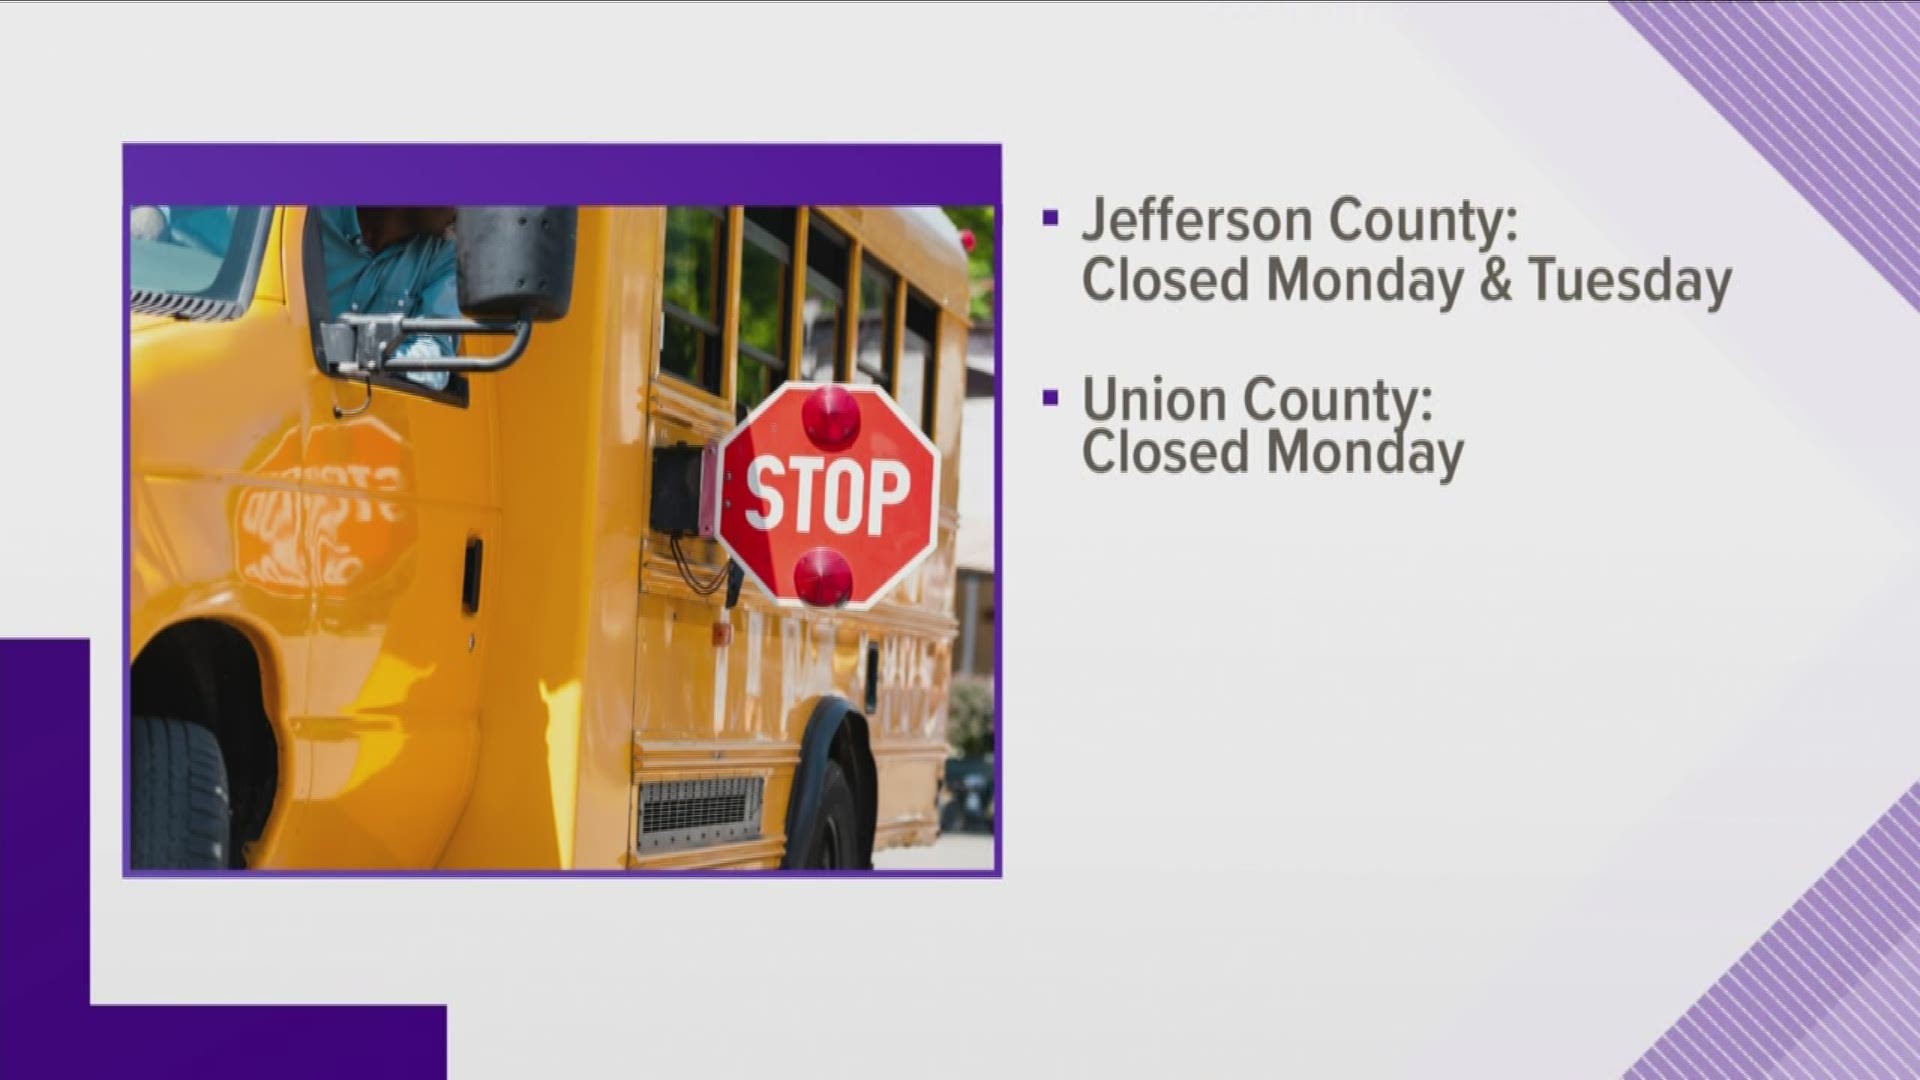 Jefferson County schools will be closed Monday and Tuesday. Union County schools will be closed Monday.